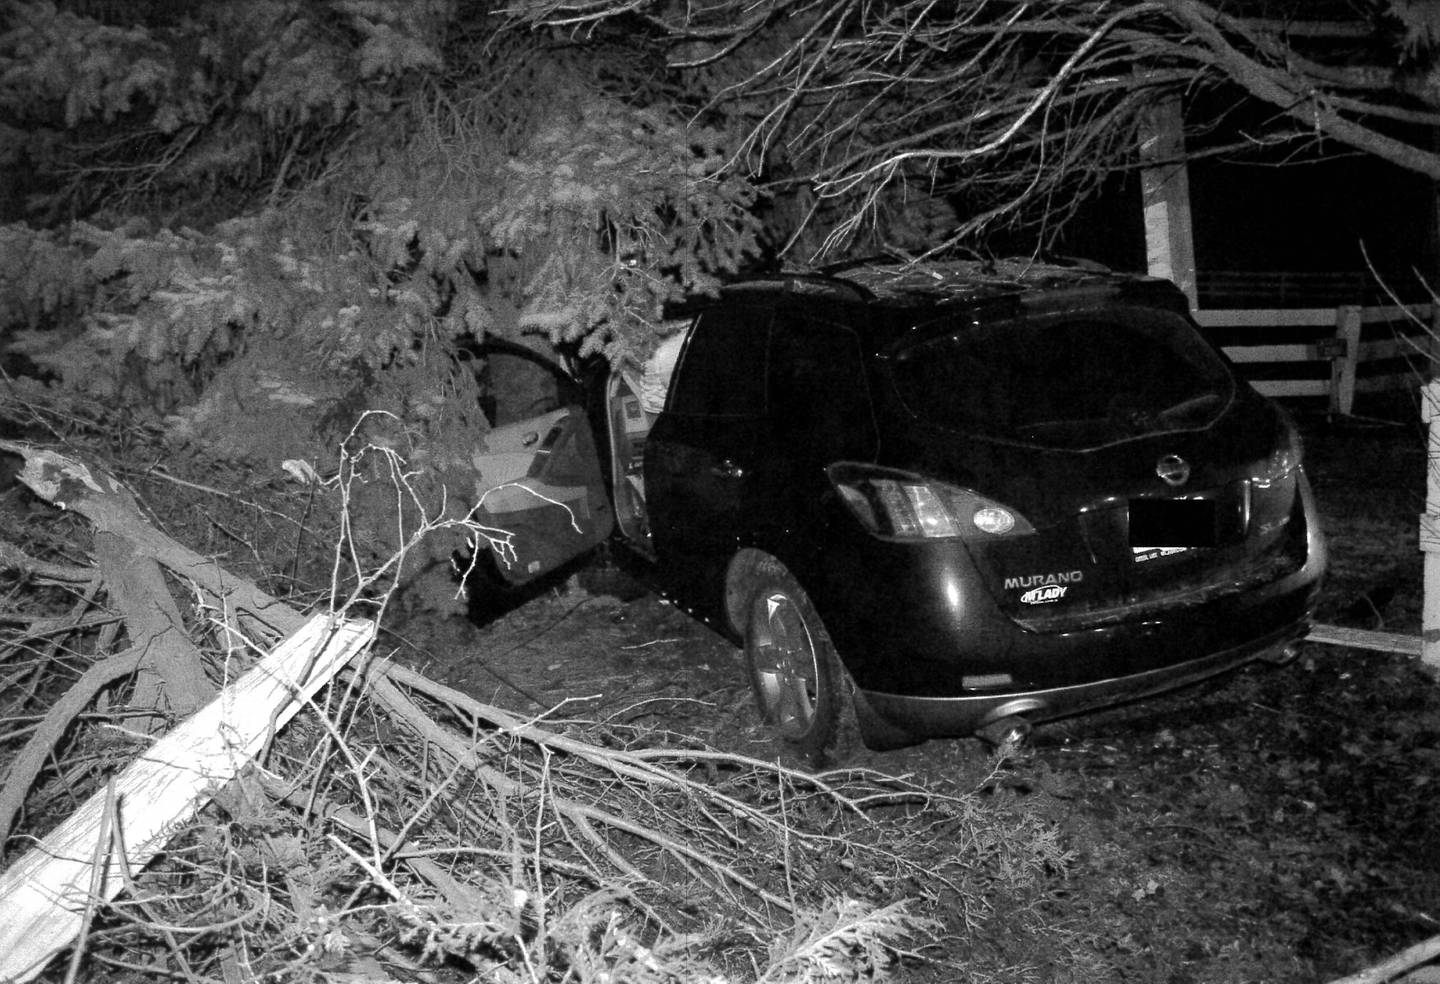 A Lake in the Hills Police Department photo shows a Nissan Murano following a March 1, 2011, crash. Anthony Prate had been driving the Murano at the time of the crash, and his wife, Bridget Prate, was pronounced dead on arrival at an Elgin hospital.